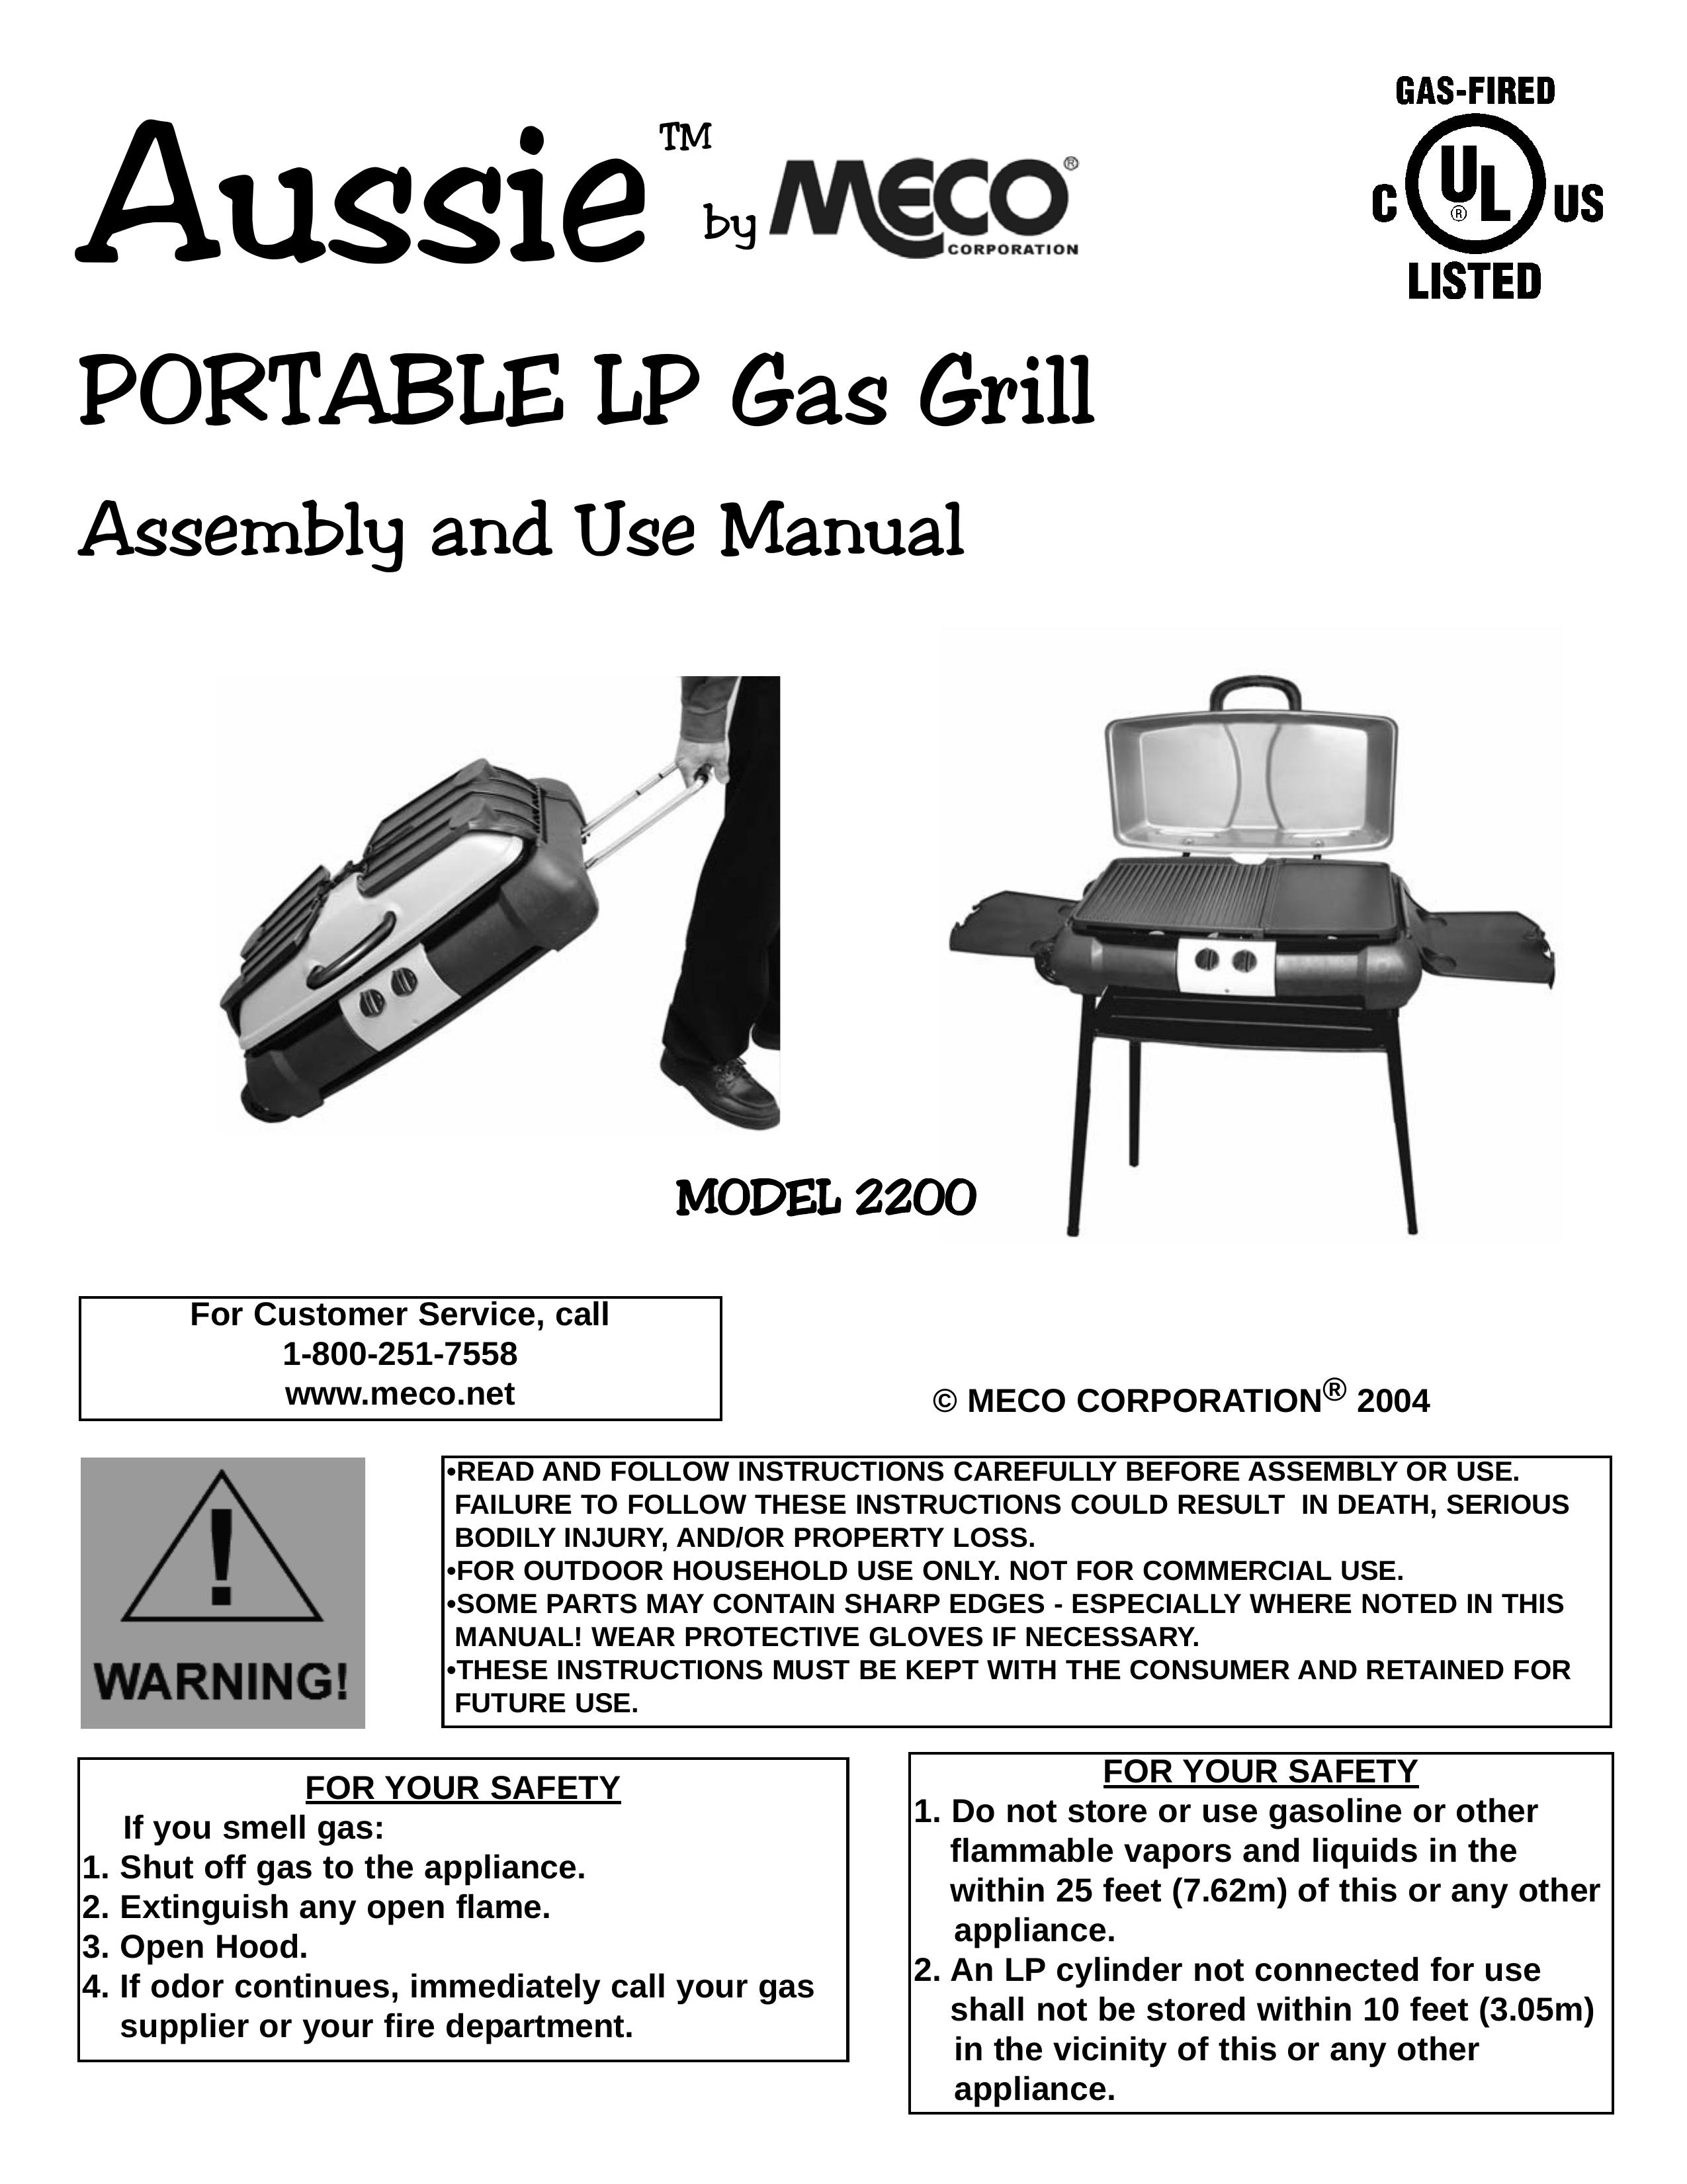 Meco 2200 Gas Grill User Manual